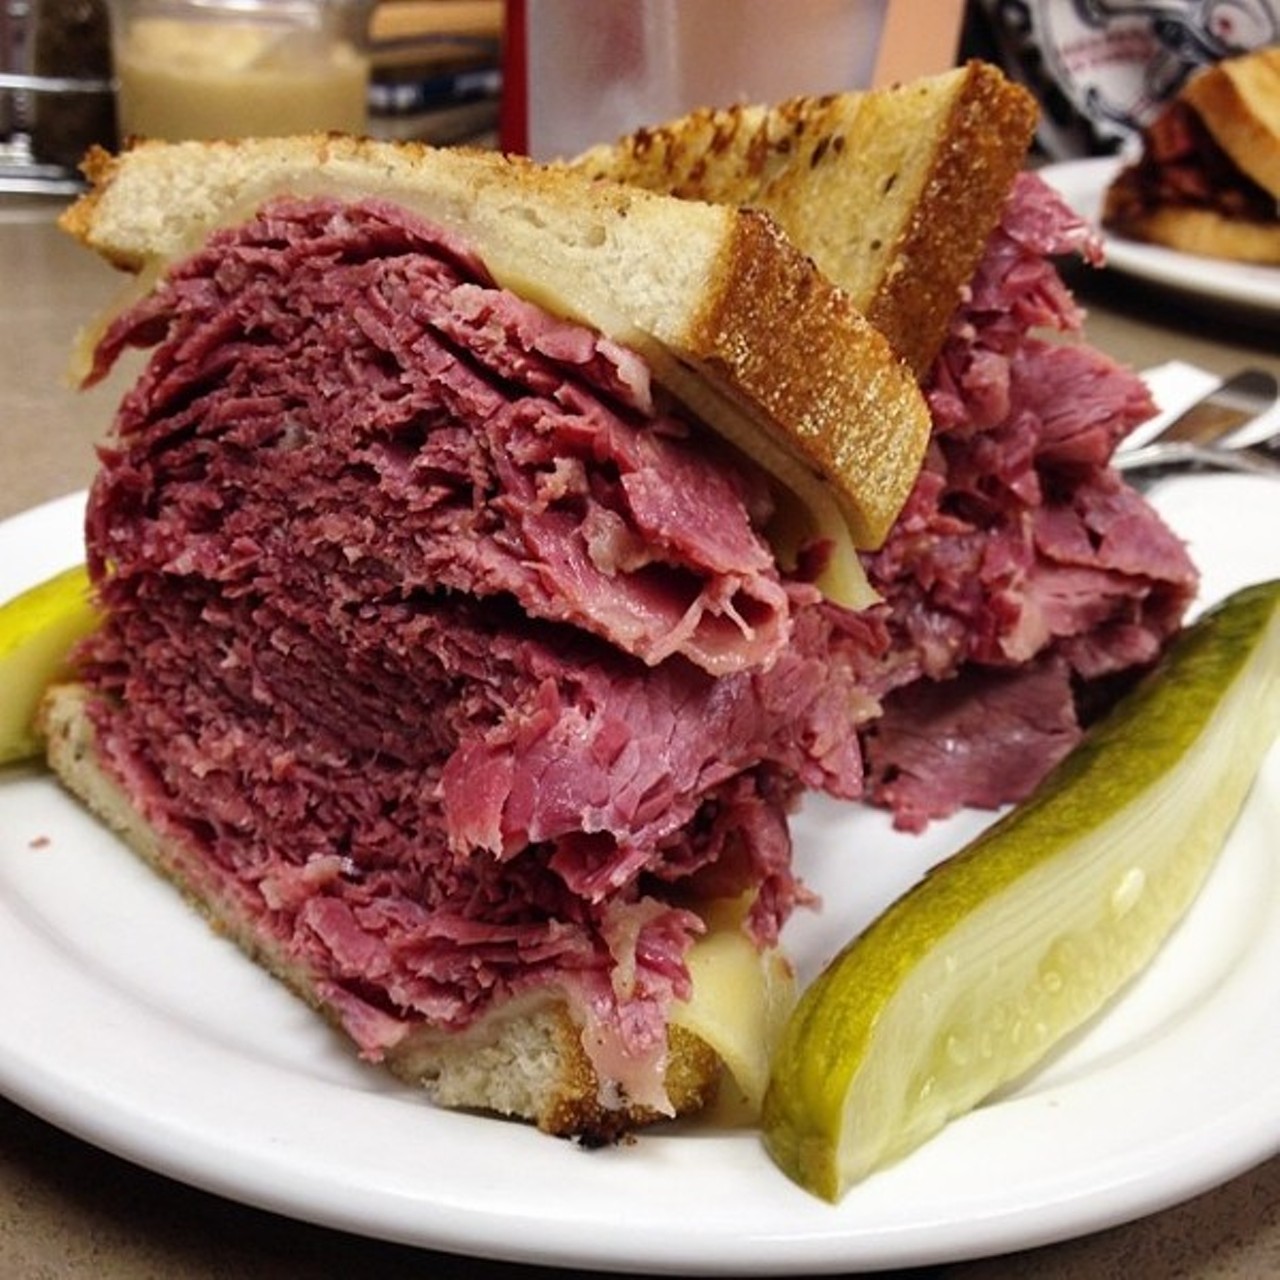  Corned Beef Sandwich at Slyman&#146;s
3106 St. Clair Ave., Cleveland
16 tons and what do you get? The best corned beef sandwich in Cleveland and it&#146;s only 15 bucks. They still slice every sandwich to order, and every sandwich still towers above much of the competition. Amaze your friends by ordering in Slymaneze: a &#147;natural&#148; means plain; &#147;original&#148; comes with mustard; and &#147;Smurf&#148; buys you one with Swiss and mustard (which ain&#146;t kosher, by the way).
Photo via Scene Archives